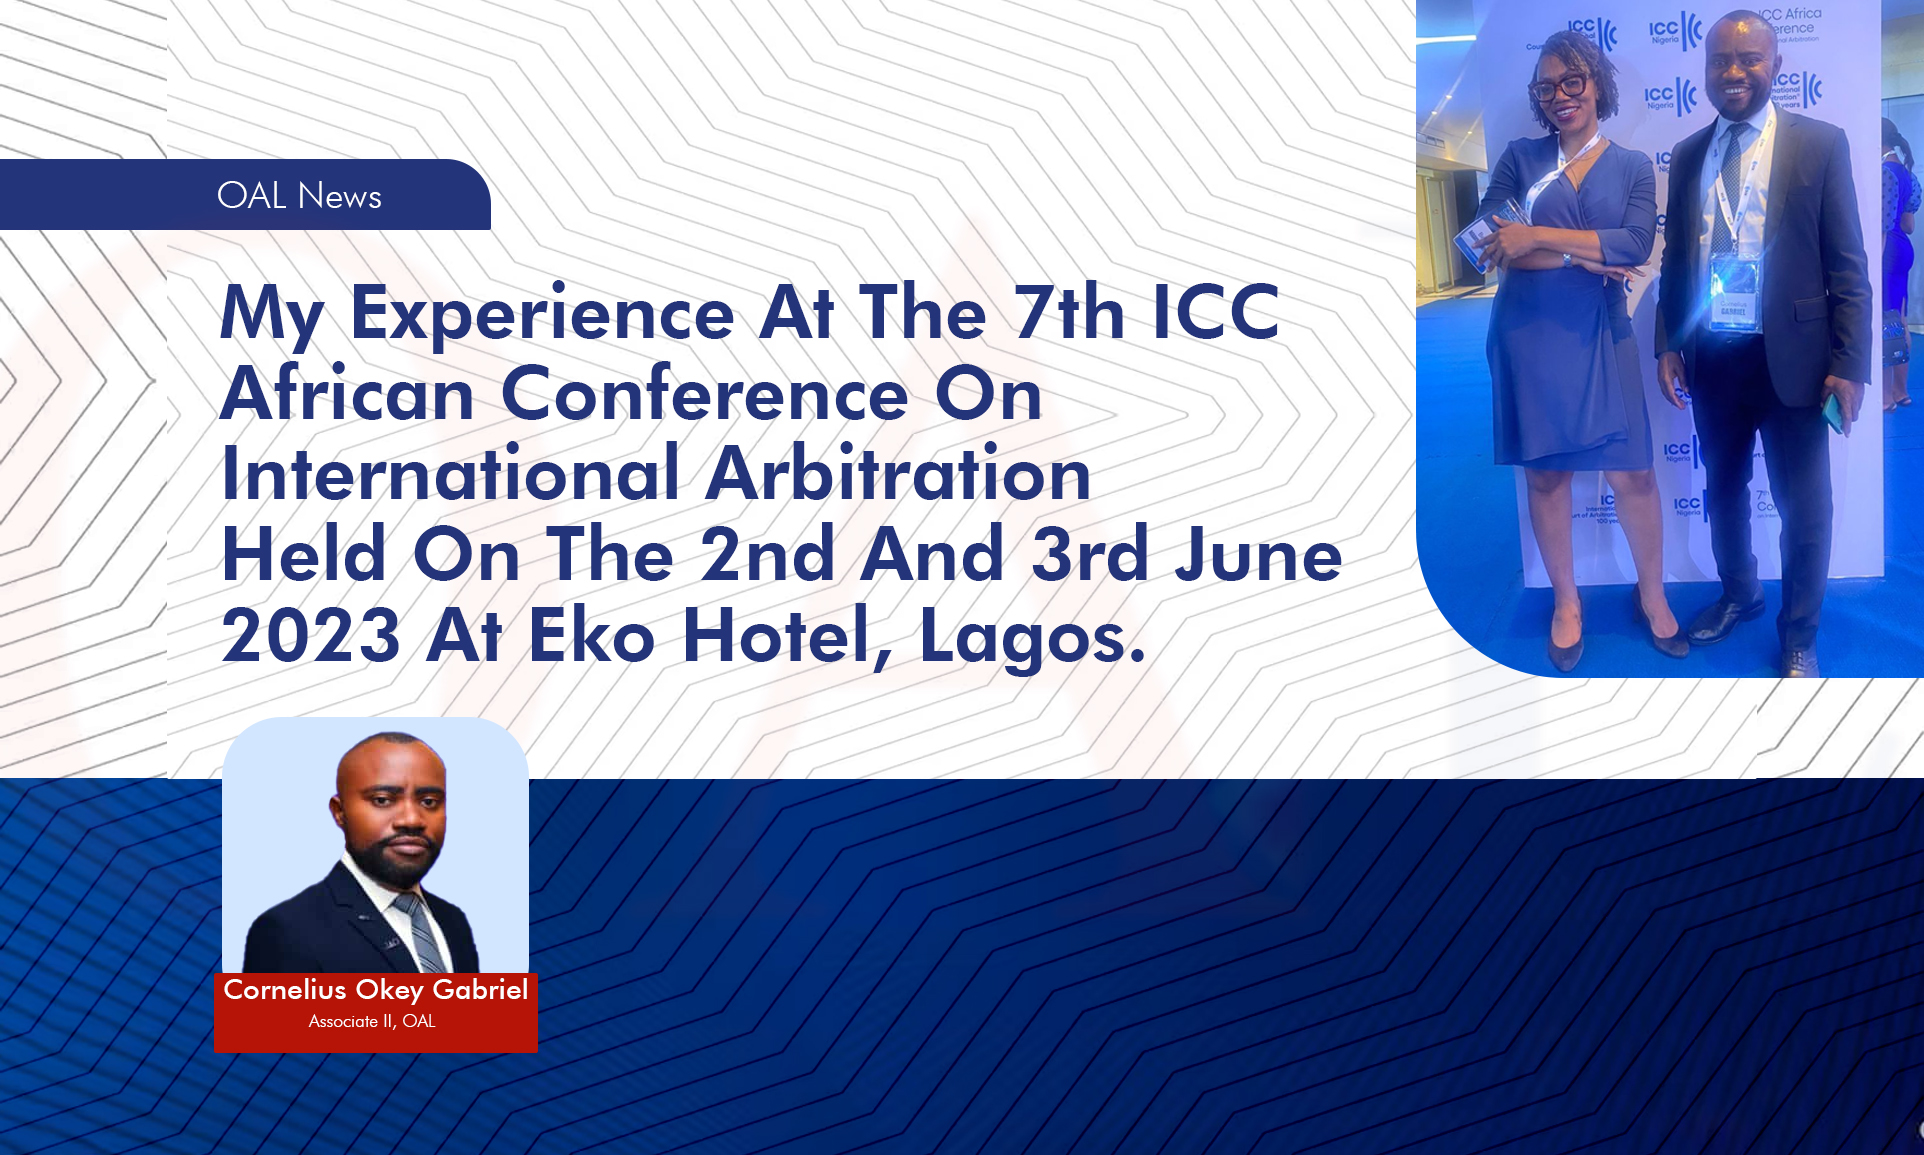 My Experience At The 7th ICC African Conference On International Arbitration Held On The 2nd And 3rd June 2023 At Eko Hotel Lagos